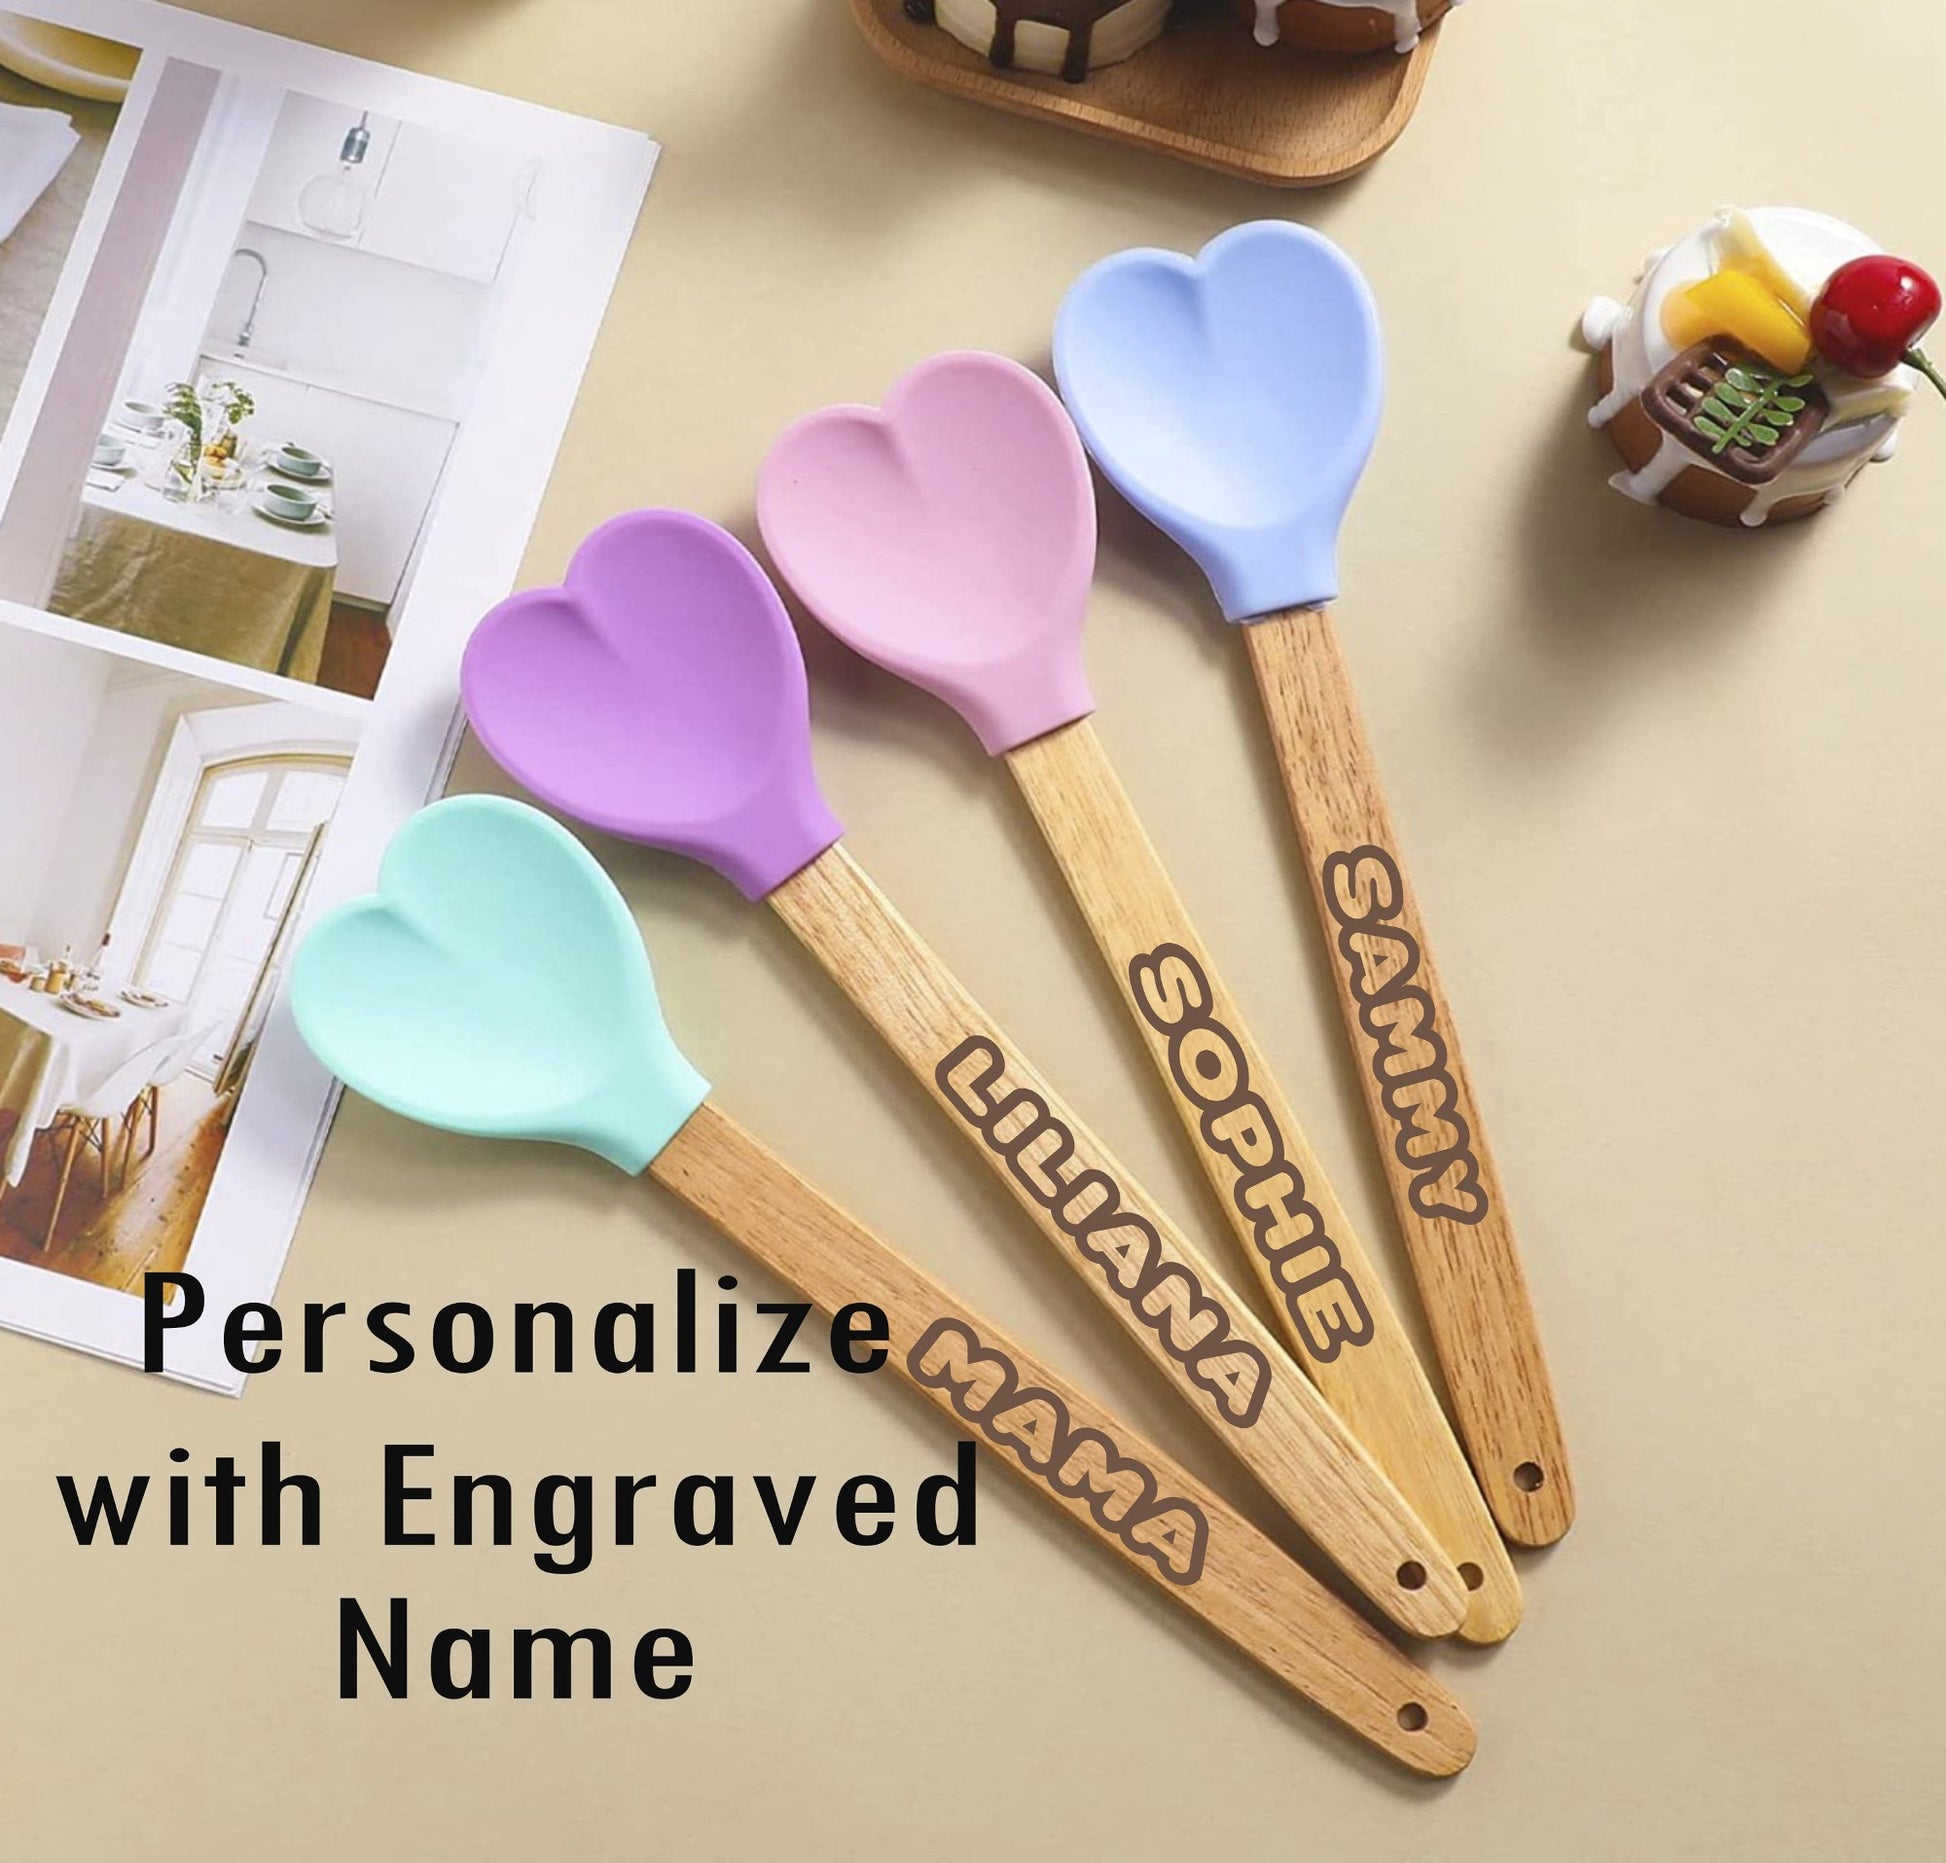 Custom Logo Imprinted Silicone Spatulas with Wooden Handles - 4 Colors